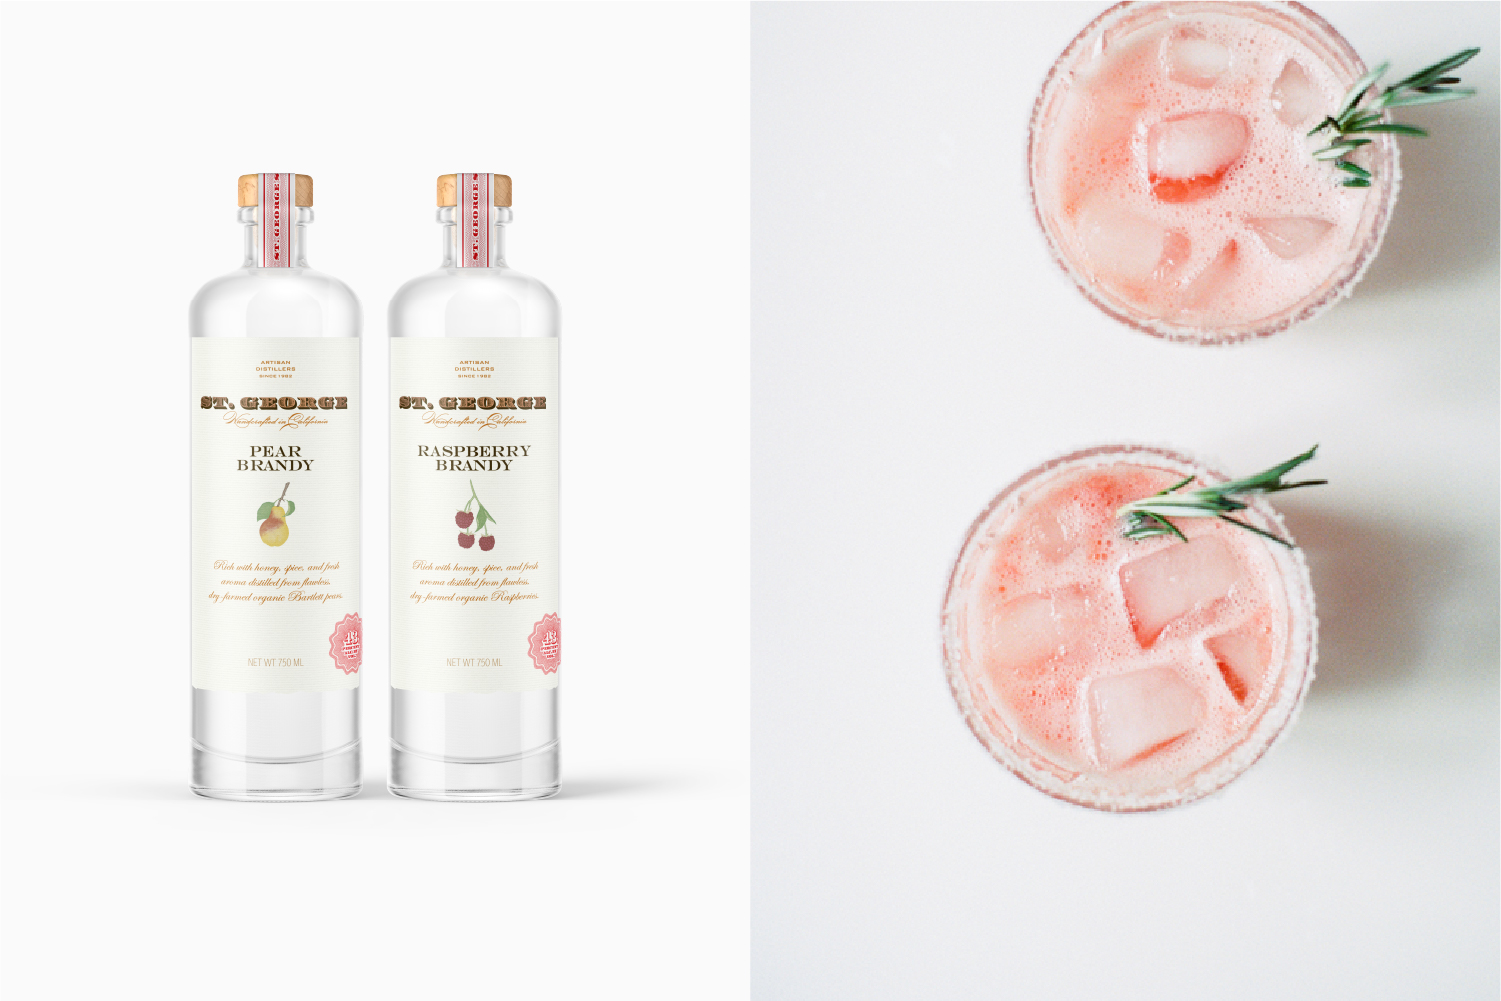 St. George Spirits Pear and Raspberry Brandy concepts